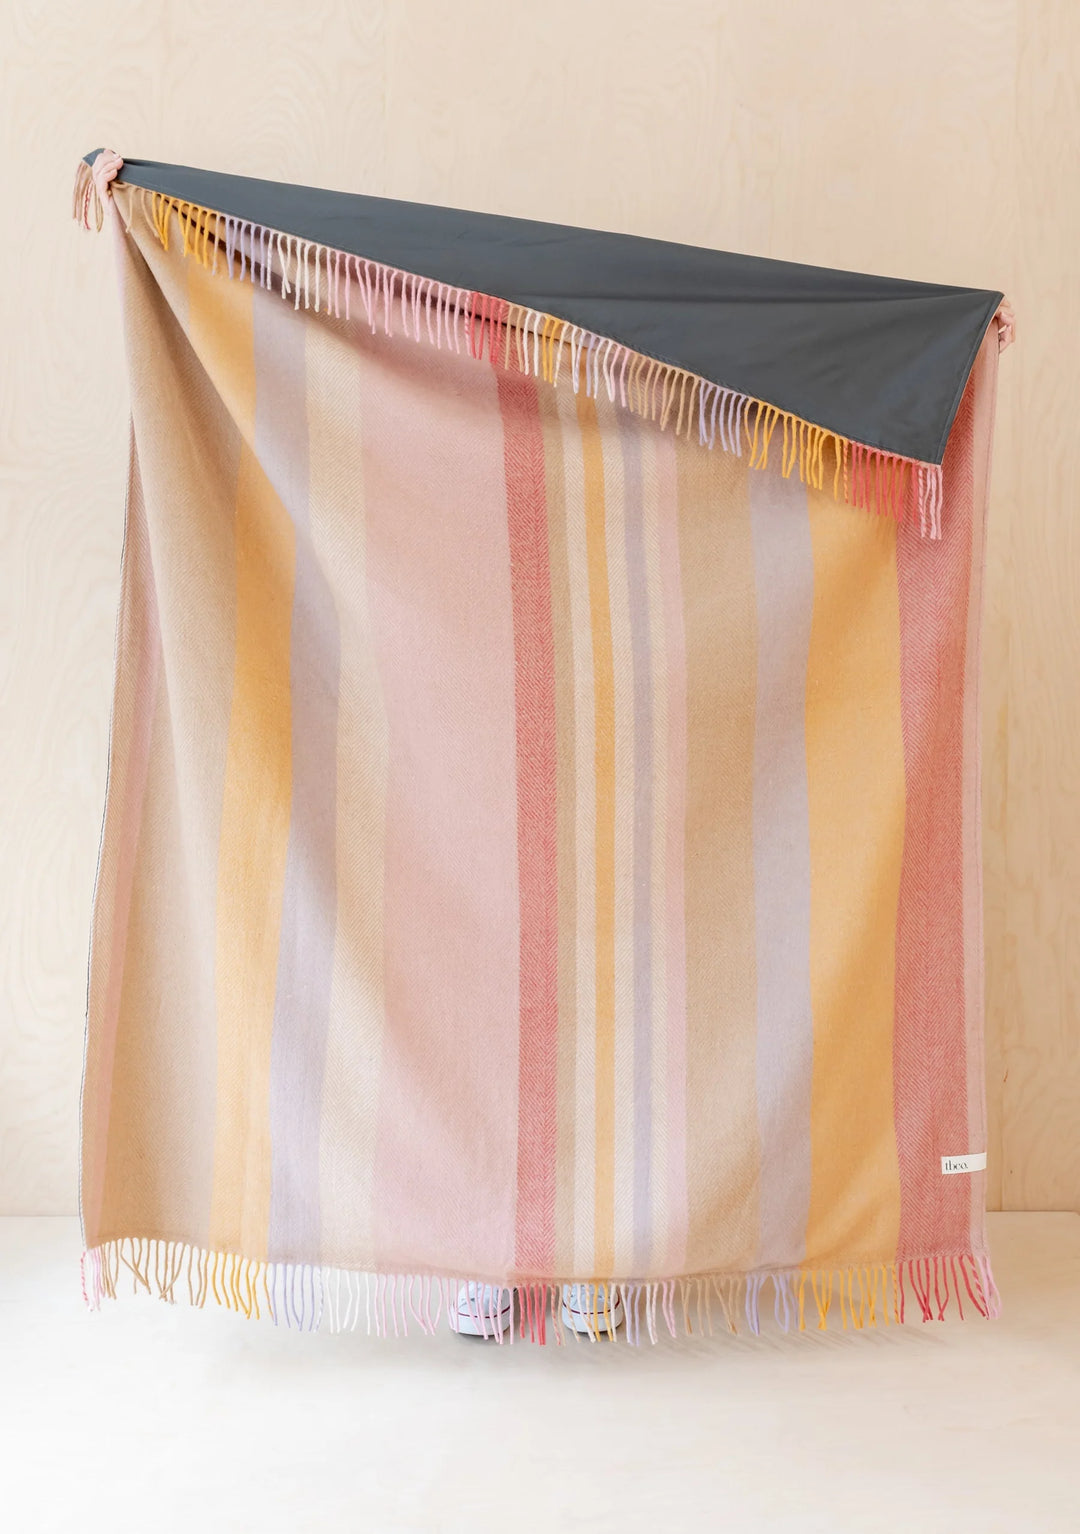 Wool Picnic Blanket in Coral Stripe with Carrier